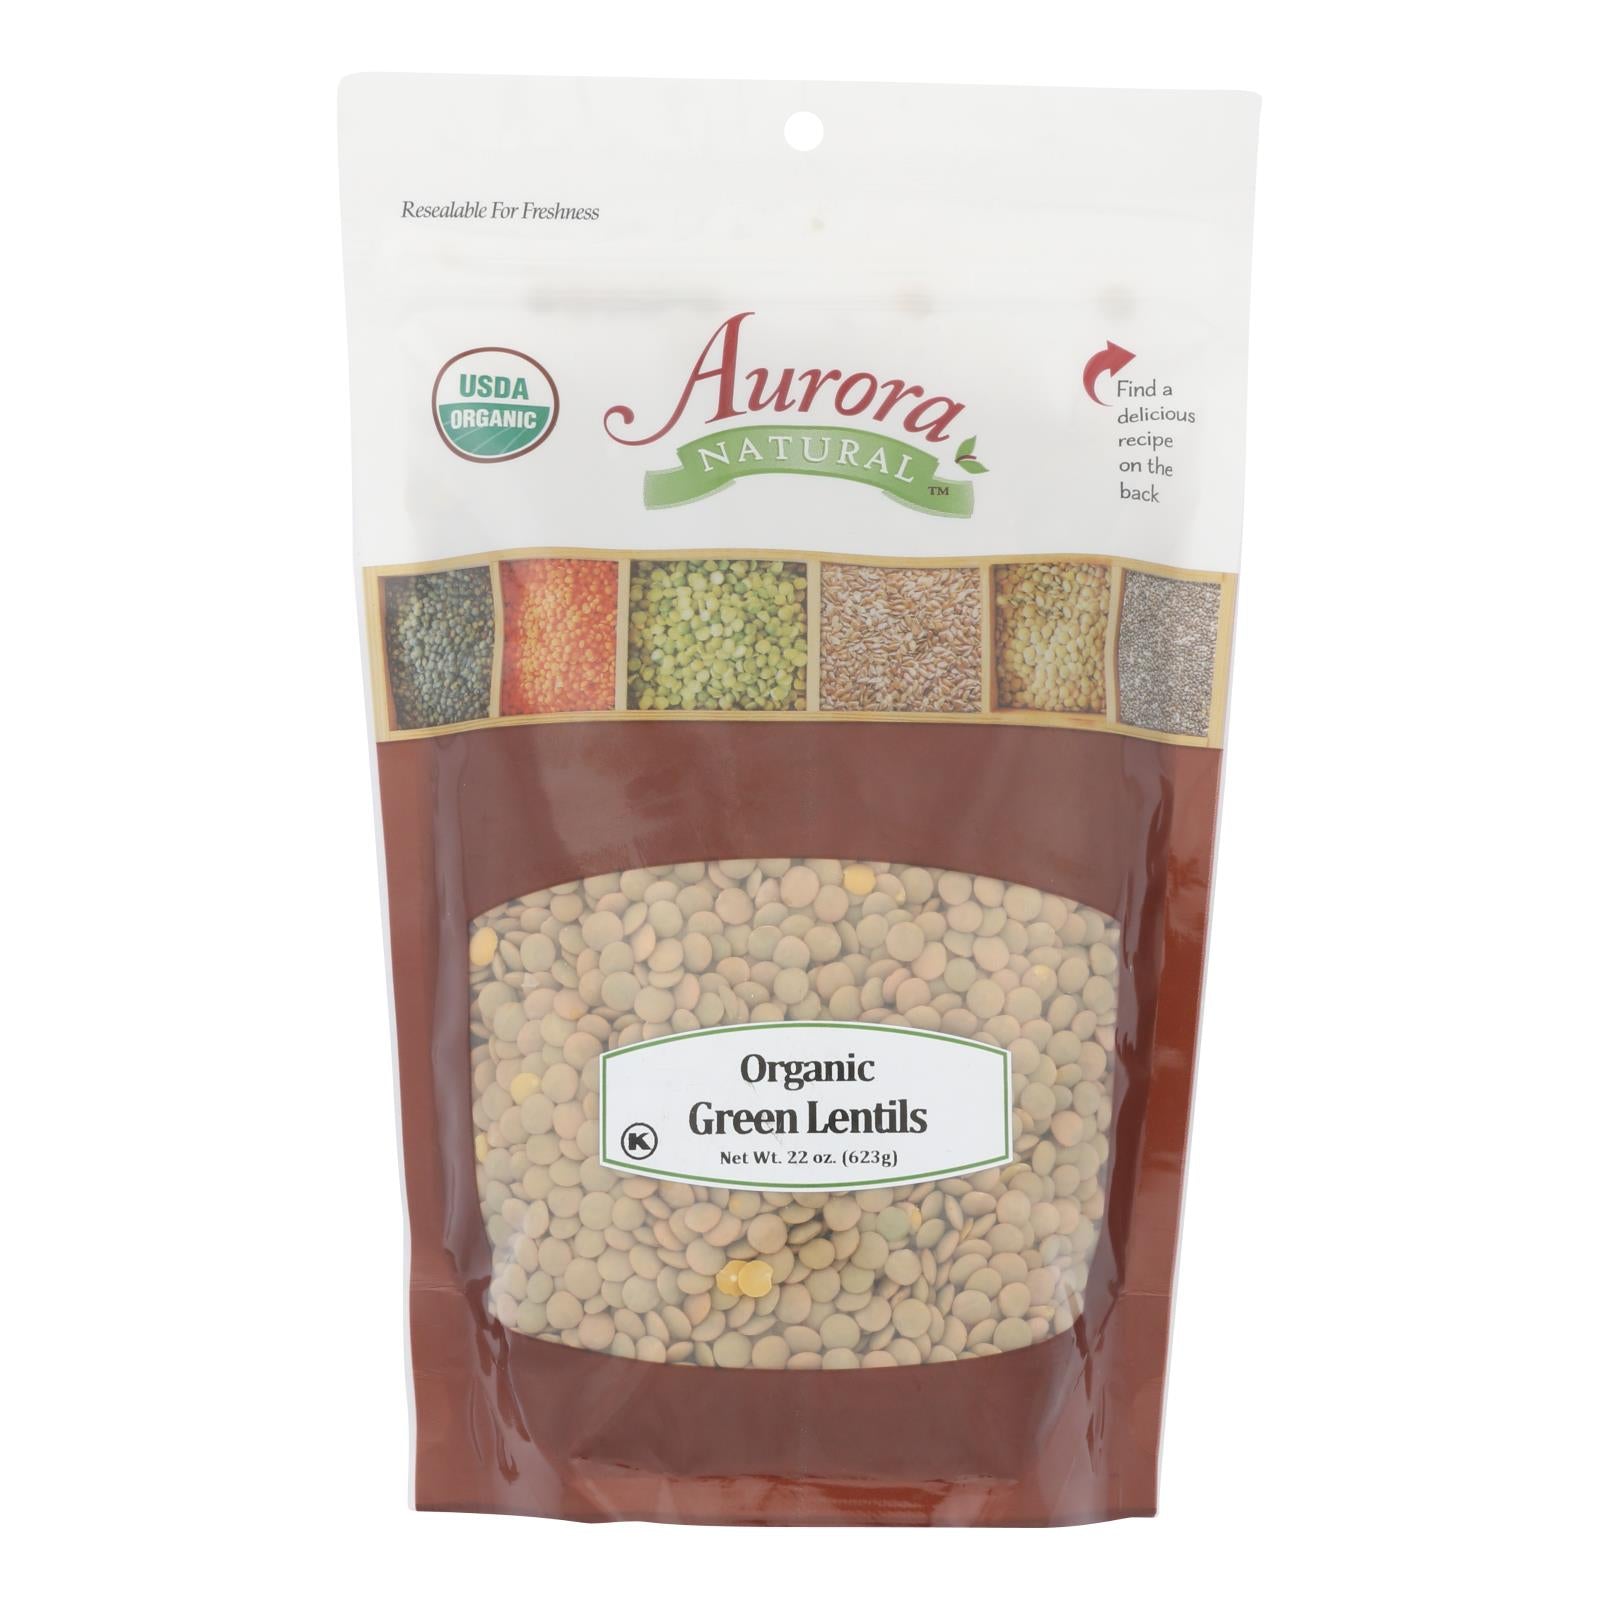 Aurora Natural Products, Aurora Natural Products - Organic Green Lentils - Case of 12 - 22 oz. (Pack of 12)